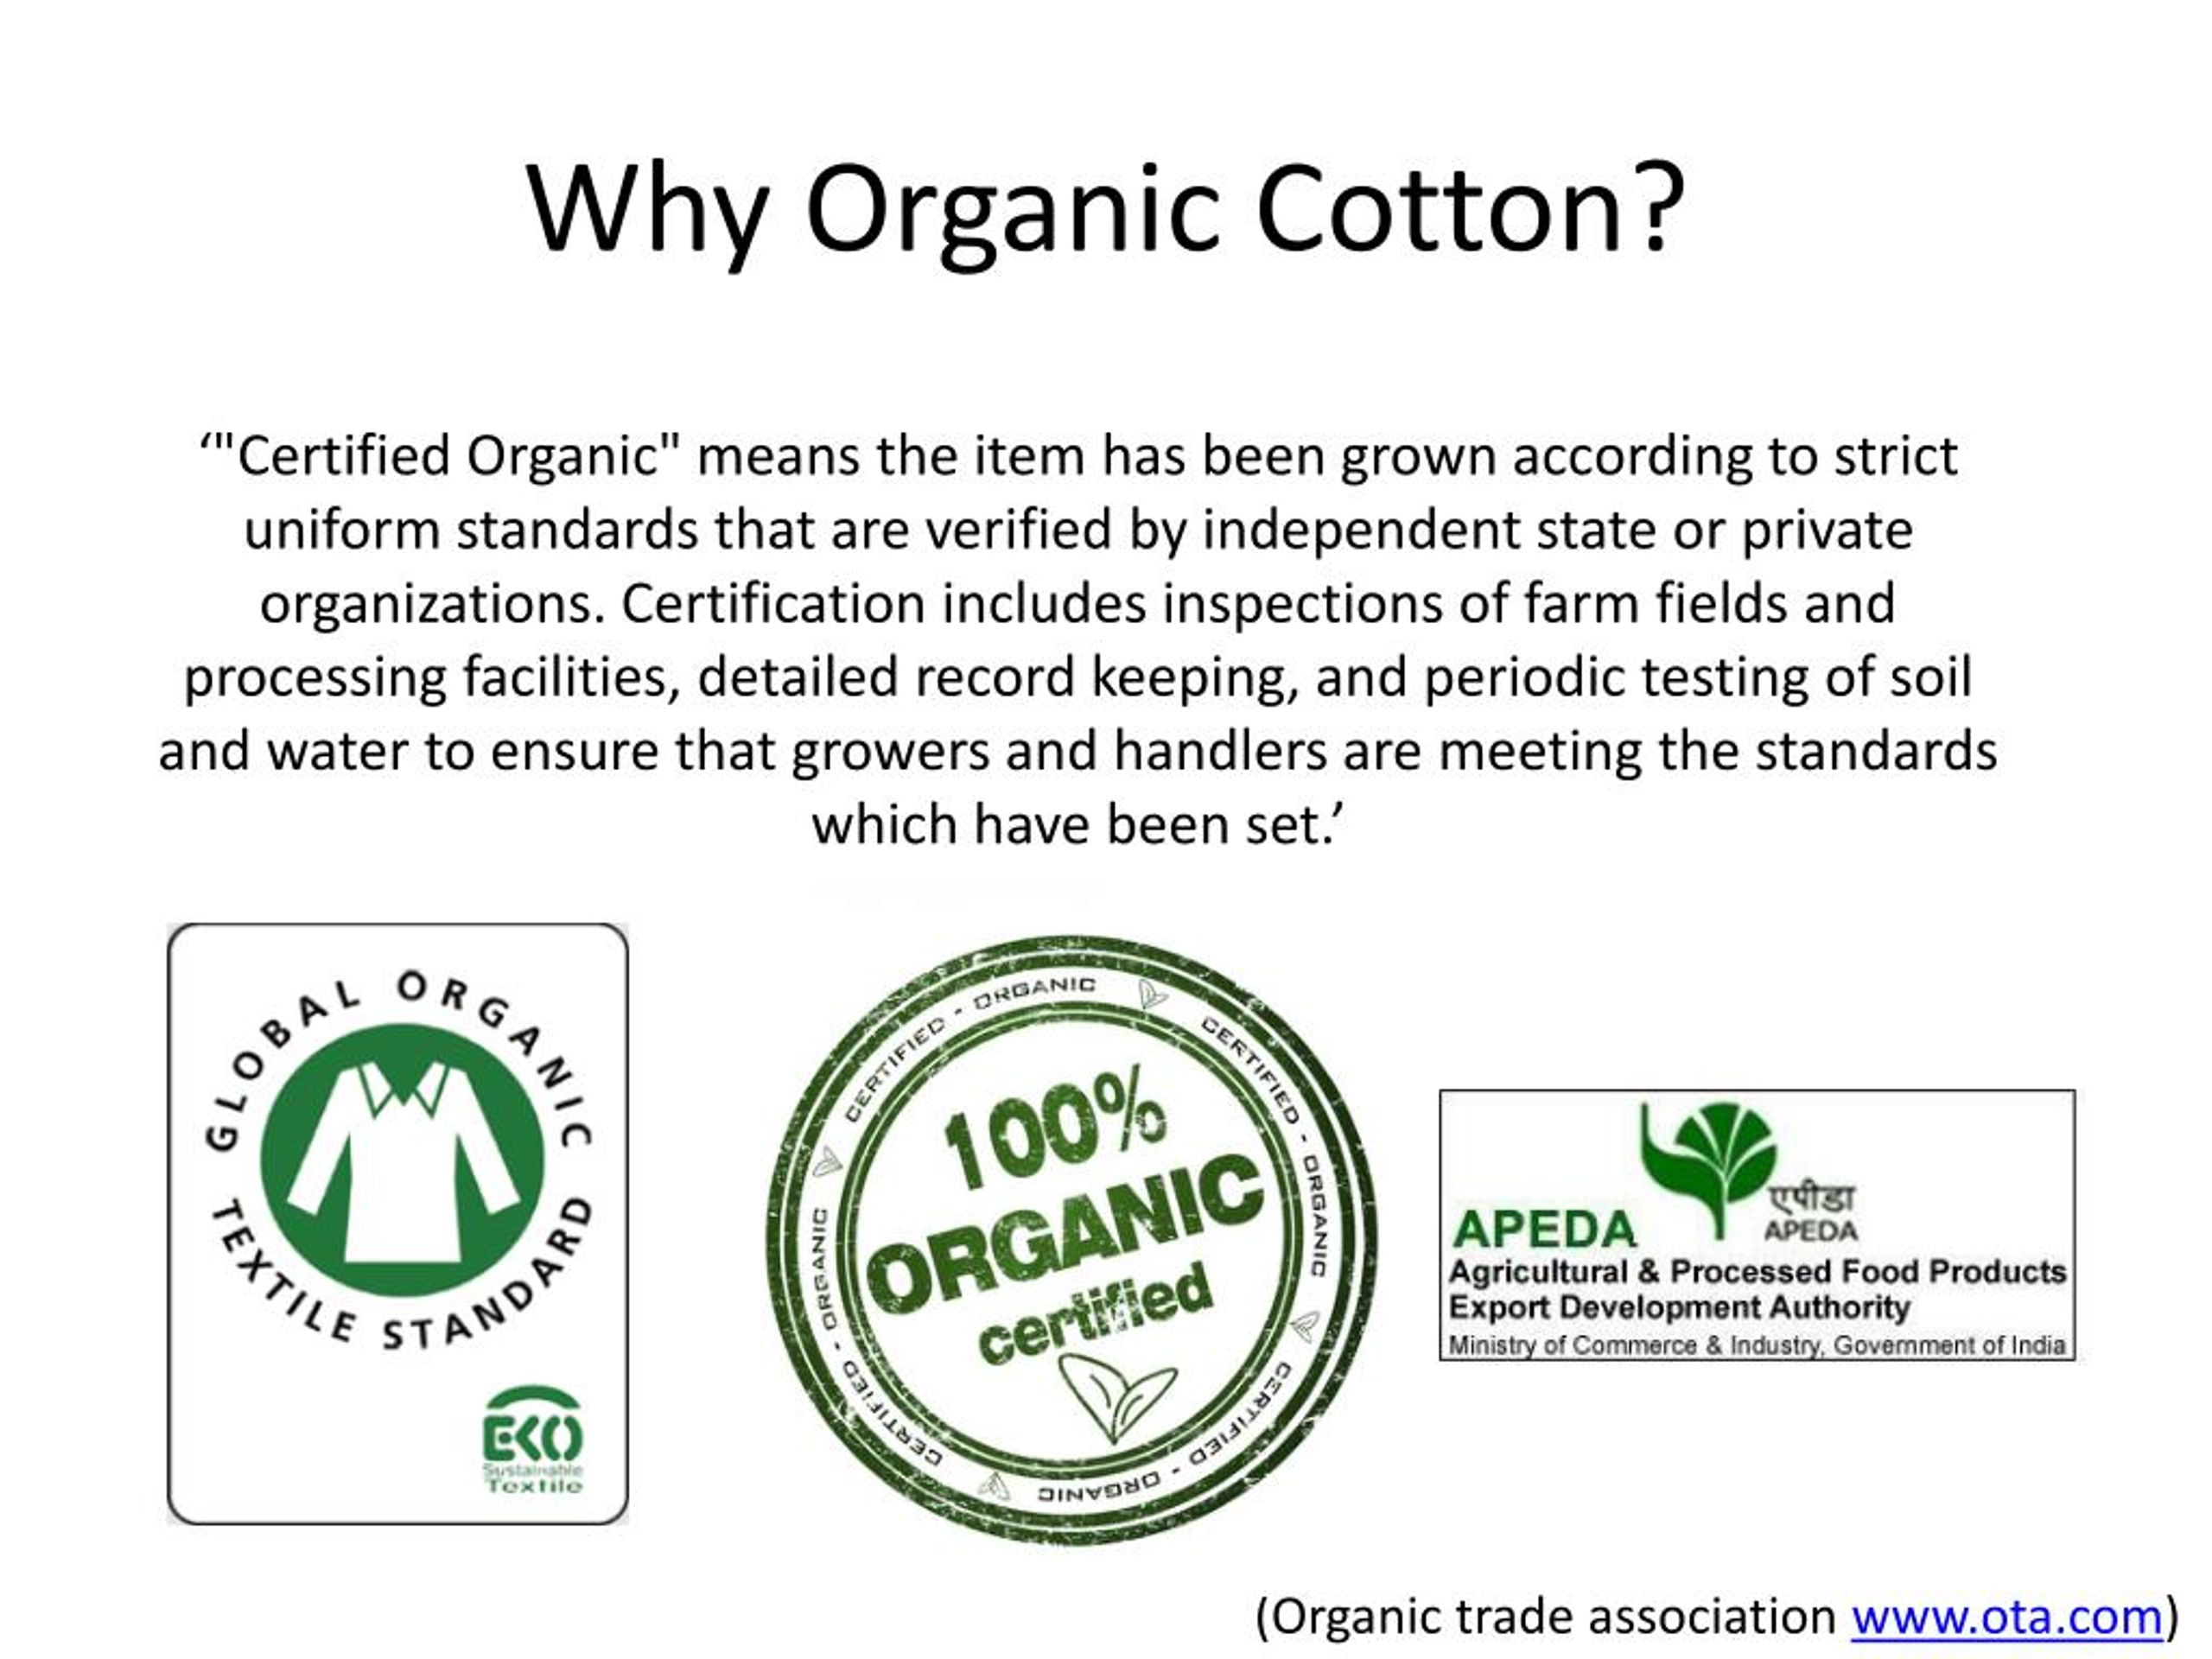 PPT - Benefits of Organic Cotton over conventional cotton PowerPoint ...